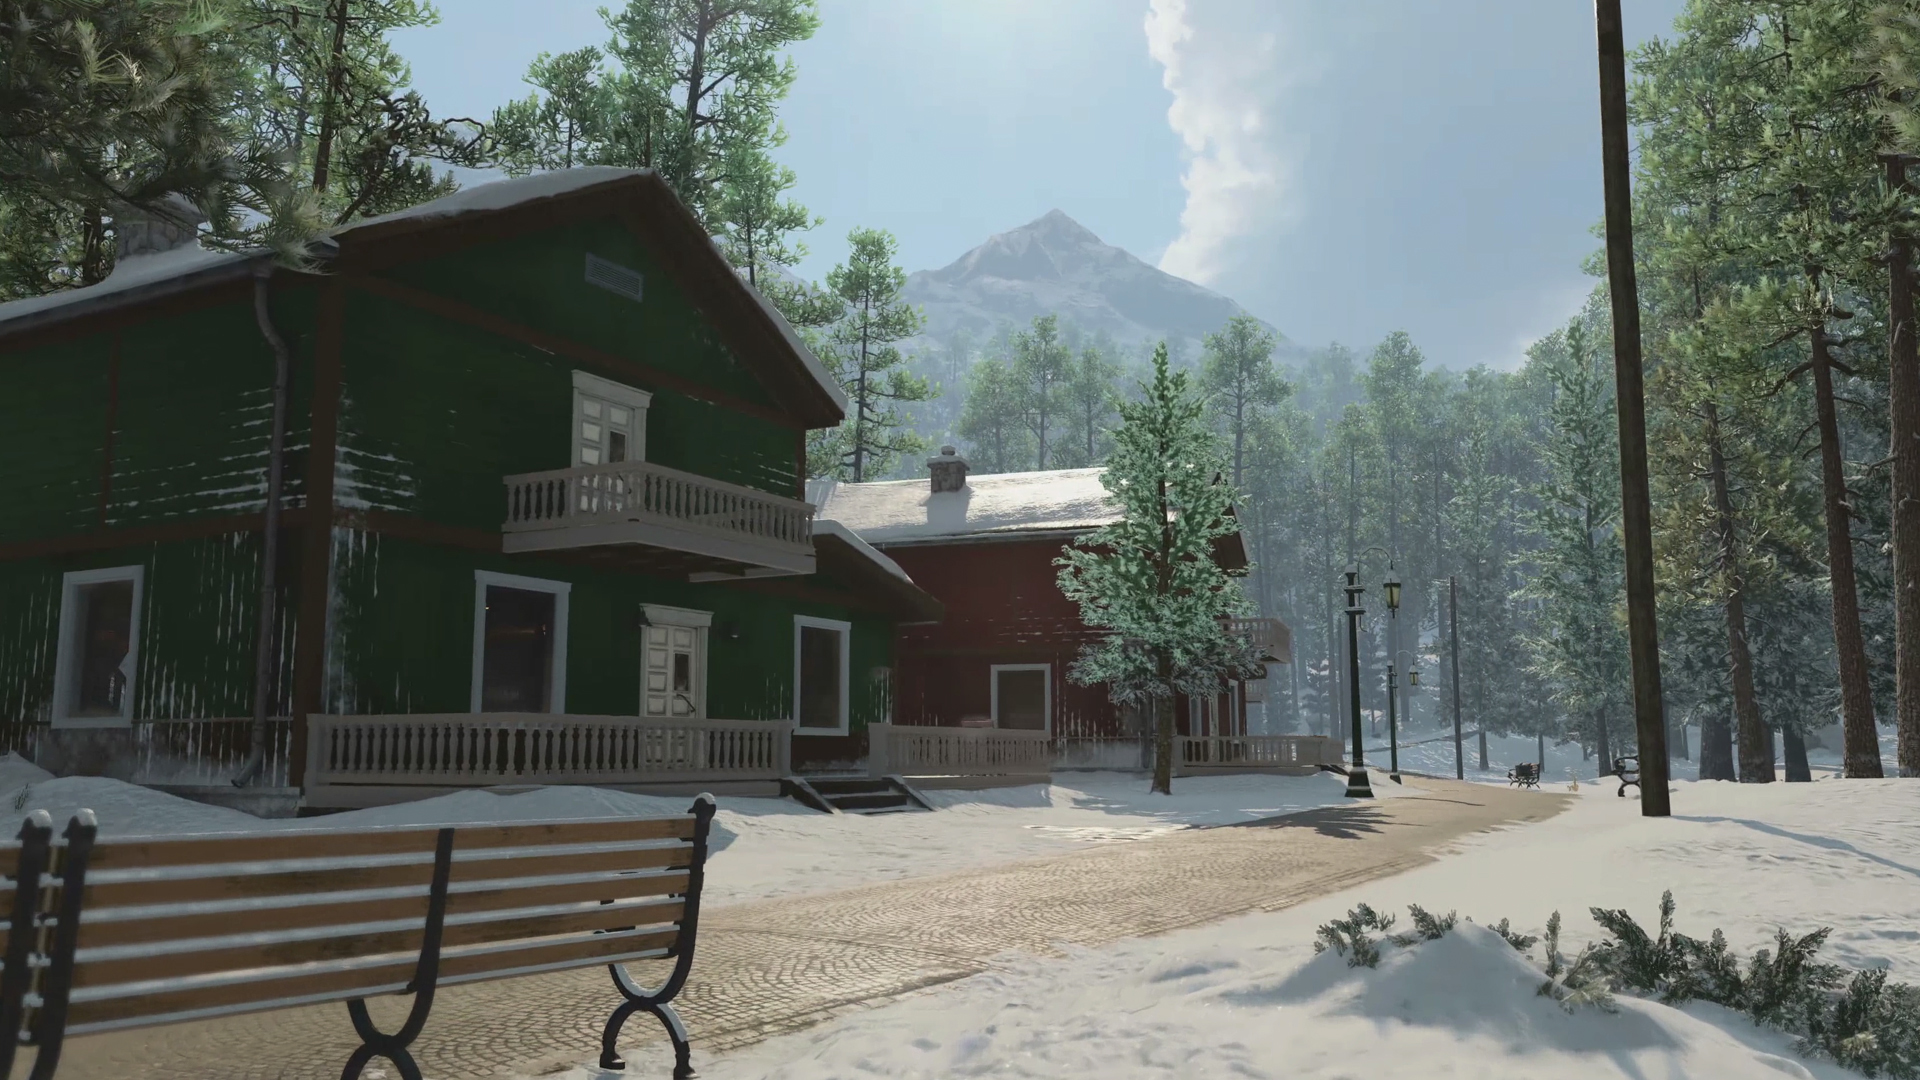 Call of Duty Black Ops Cold War multiplayer maps: A quaint town in a snowy forest, with two large houses and a bench at the center of the image. 